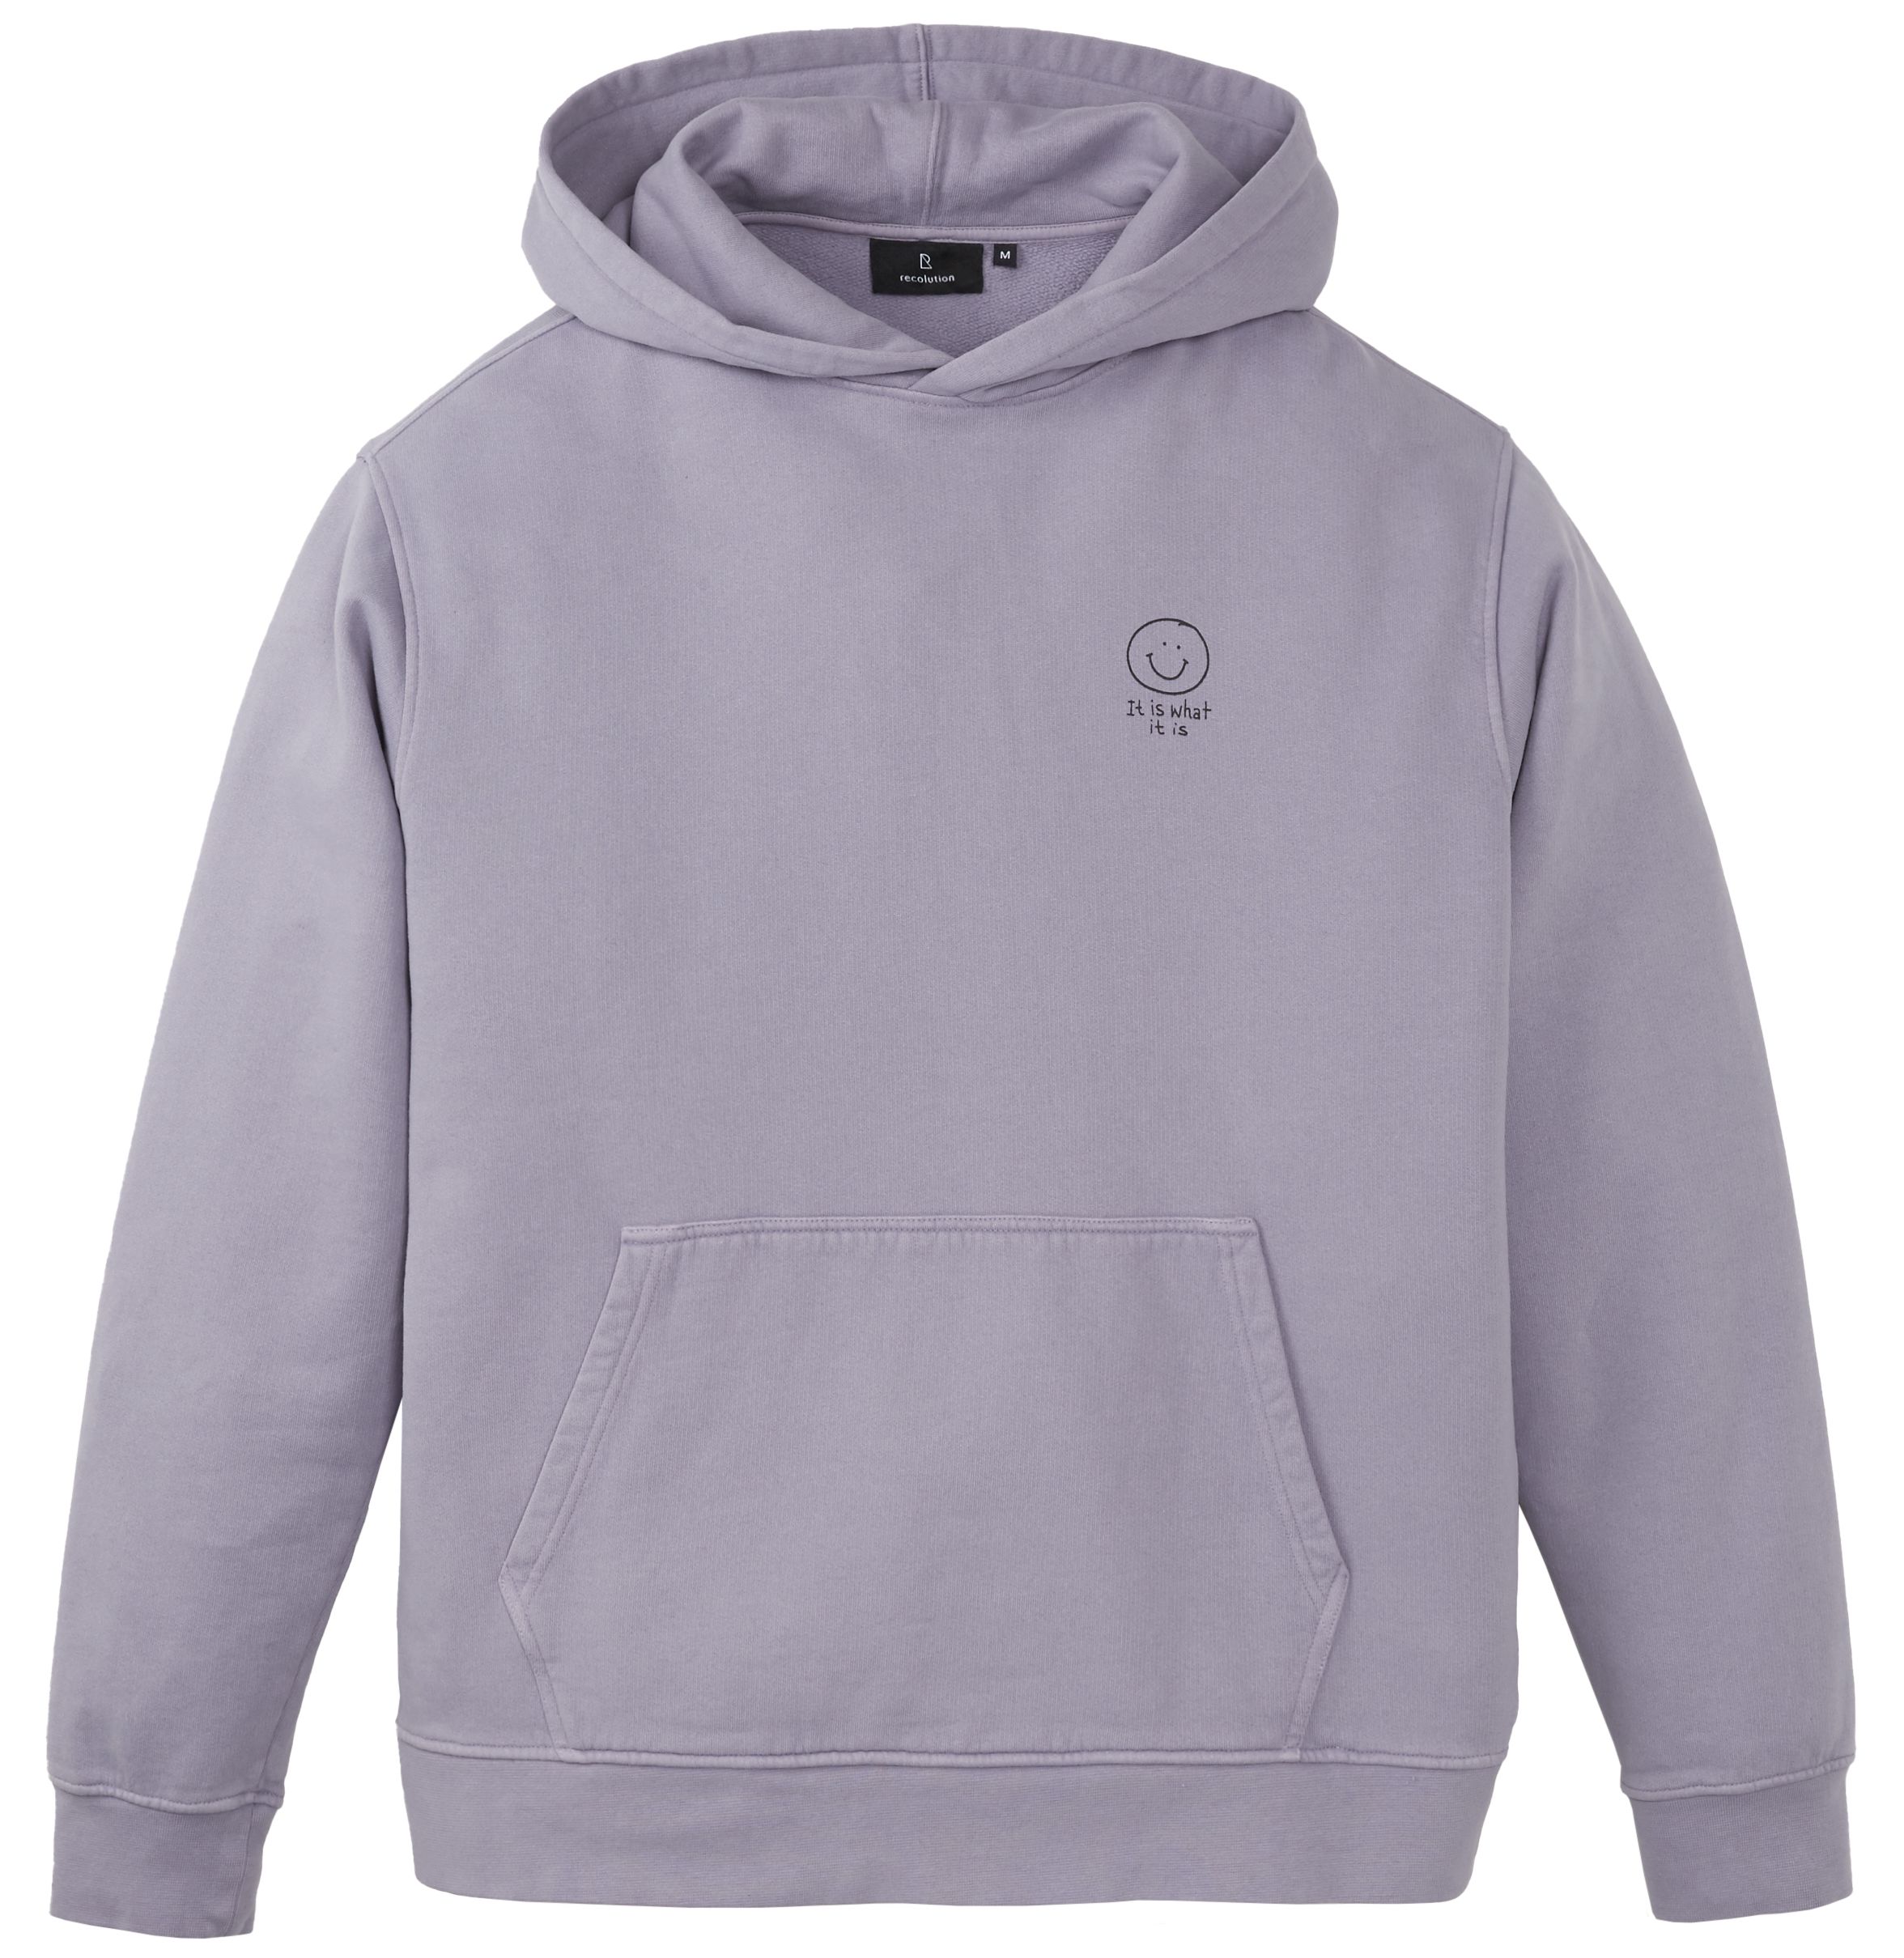 Hoodie OLIVE SMILEY gray lilac unisex